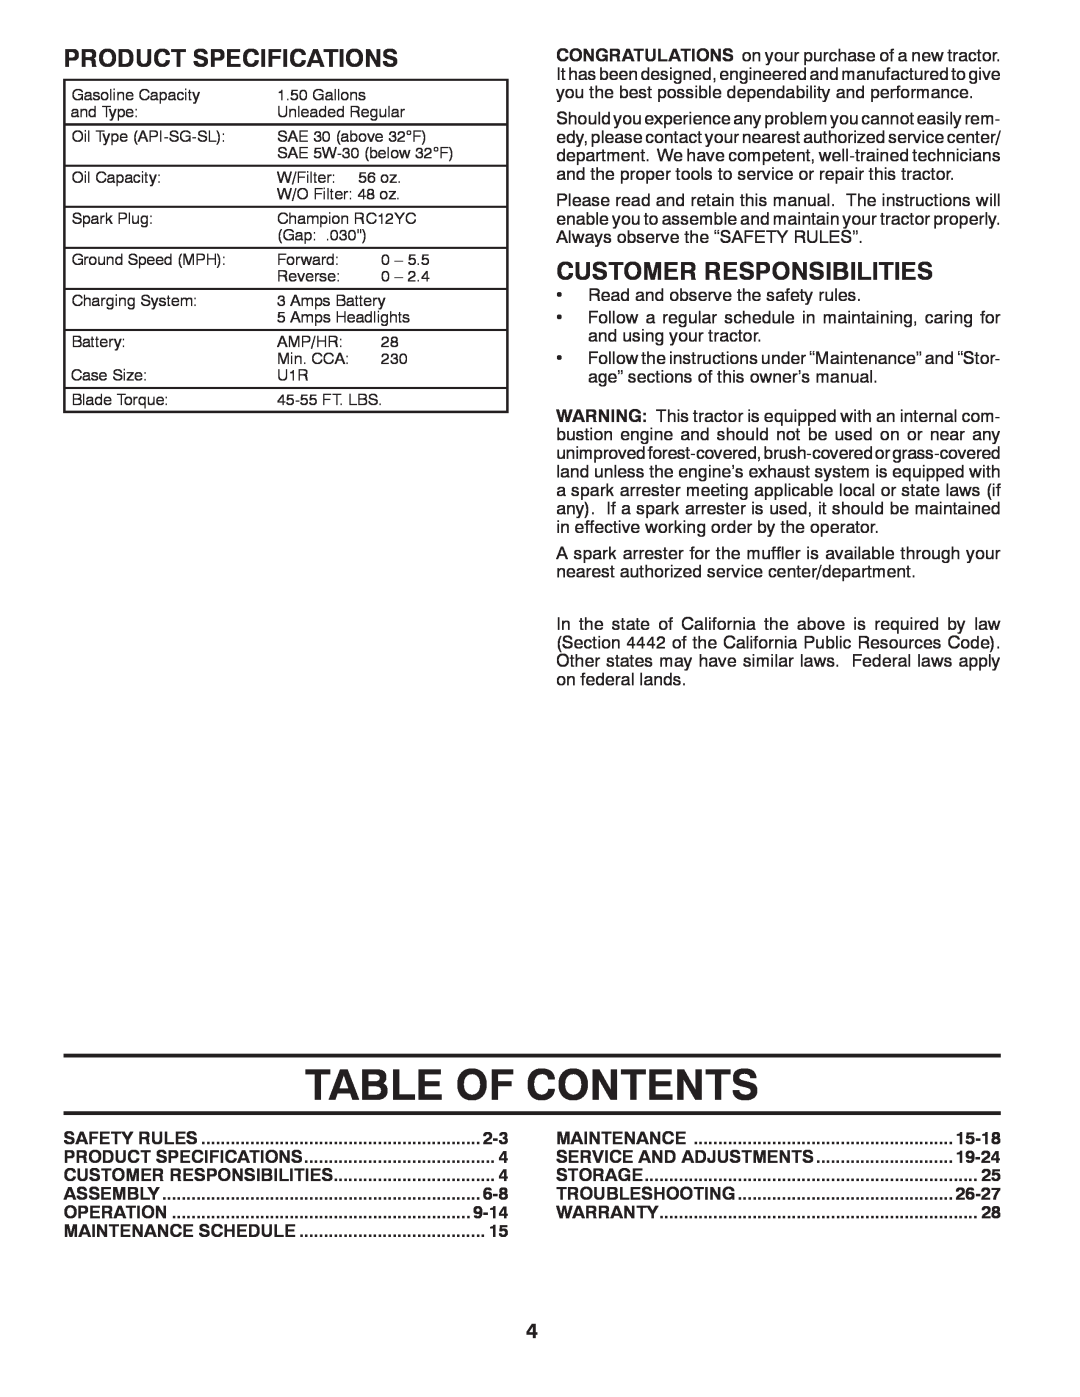 Poulan 413106, 96042005000 Table Of Contents, Product Specifications, Customer Responsibilities, 9-14, 15-18, 19-24, 26-27 